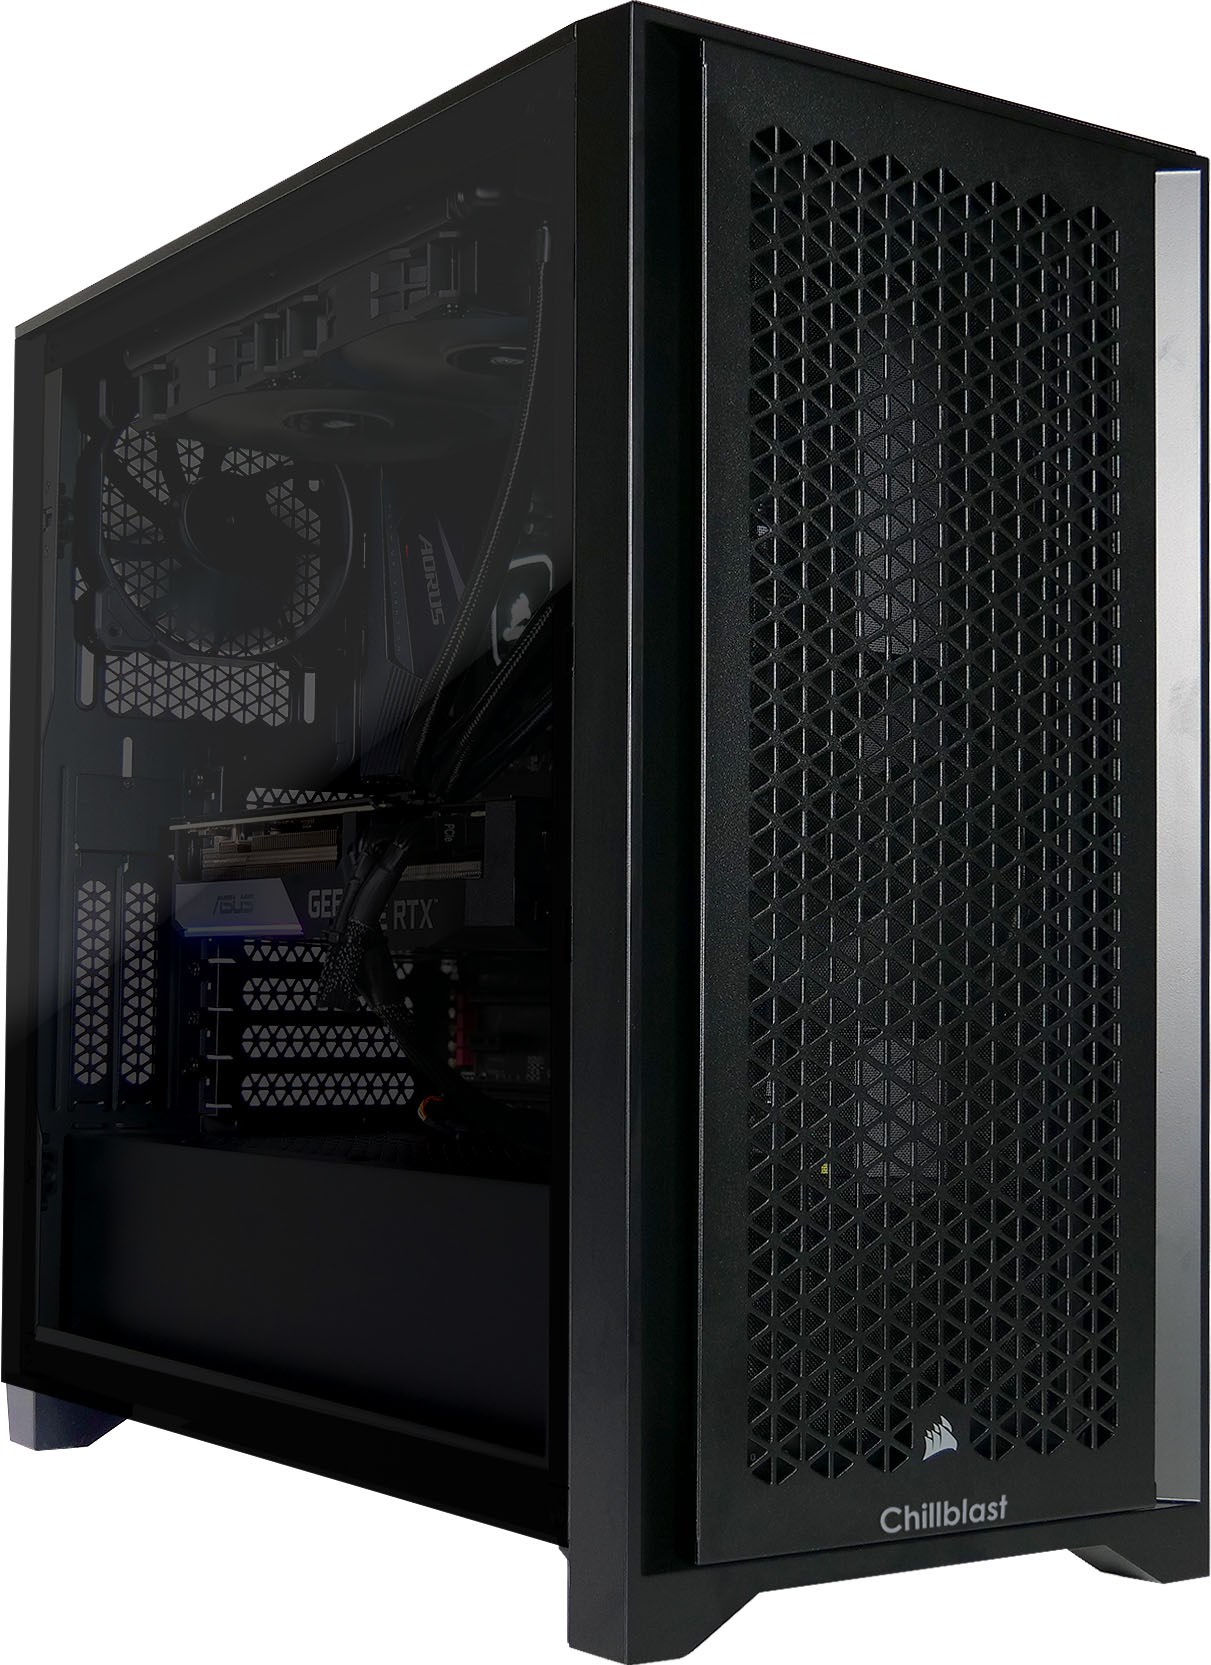 View of front and left side of a Chillblast Vanta Black R7 RTX 3070 Gaming PC